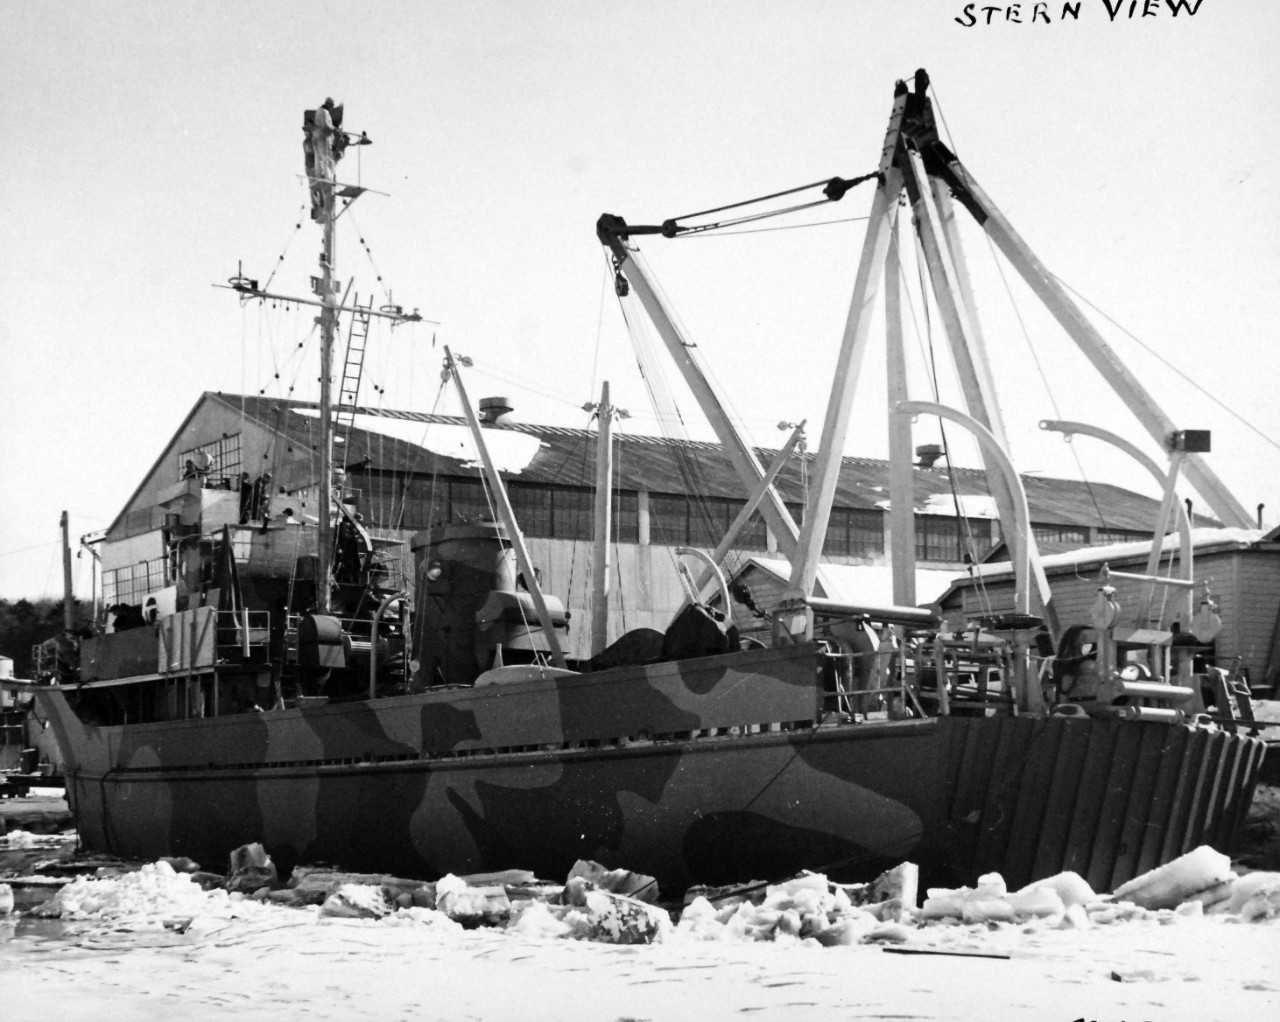 19-LCM-Box-574-YMS-445-2:  YMS-445,  1944.   Stern view, at C. Hiltebrant Drydock Co, Kingston, New York, 1944.  Official Bureau of Ships Photograph, now in the collections of the National Archives.  (2017/10/18).   